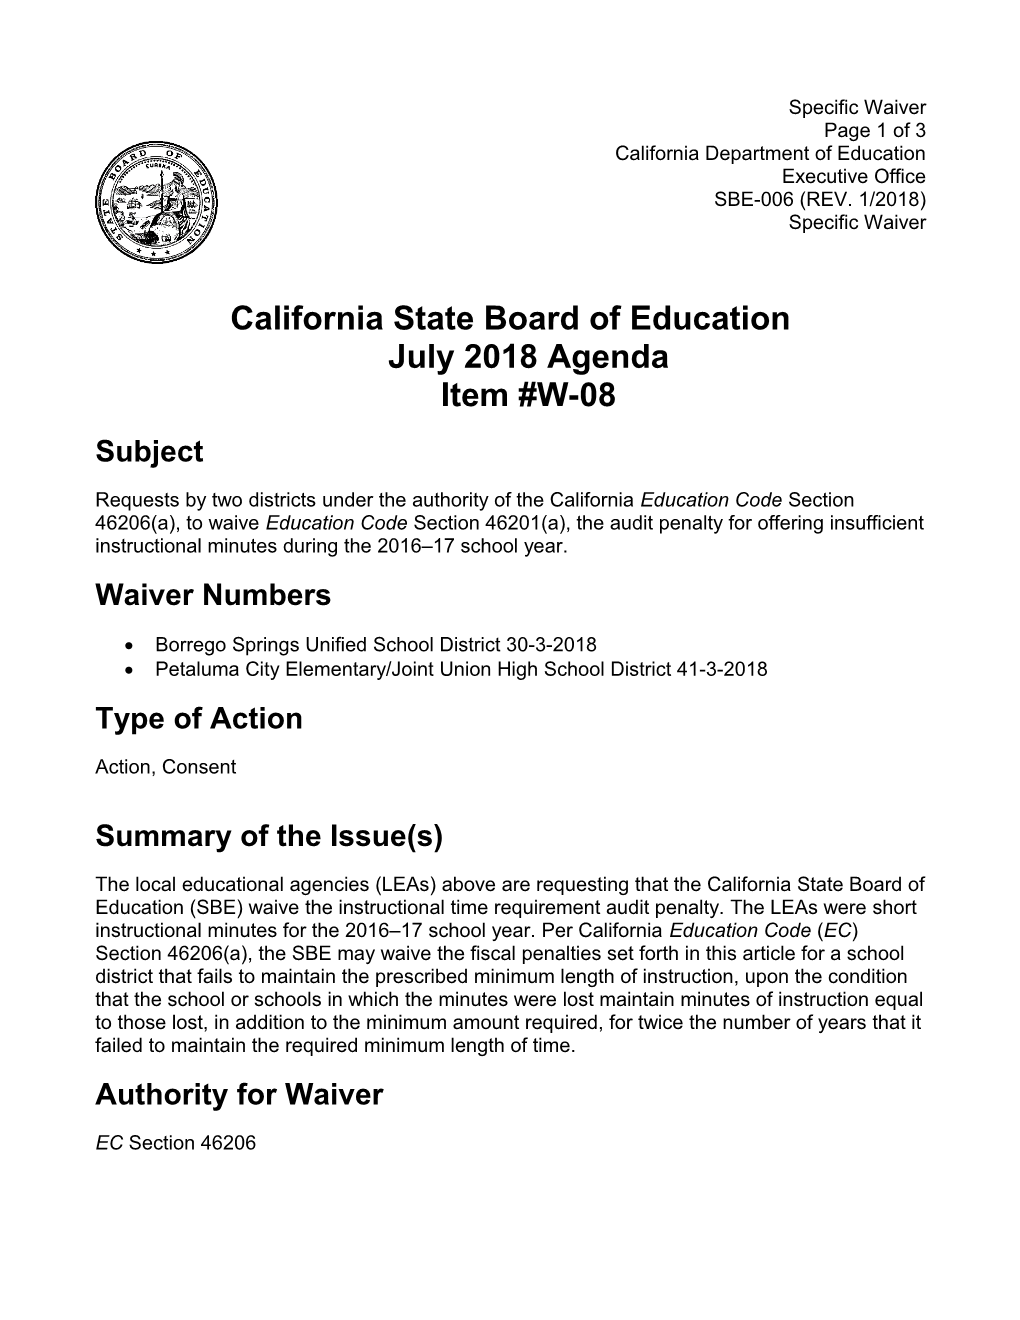 July 2018 Waiver Item W-08 - Meeting Agendas (CA State Board of Education)